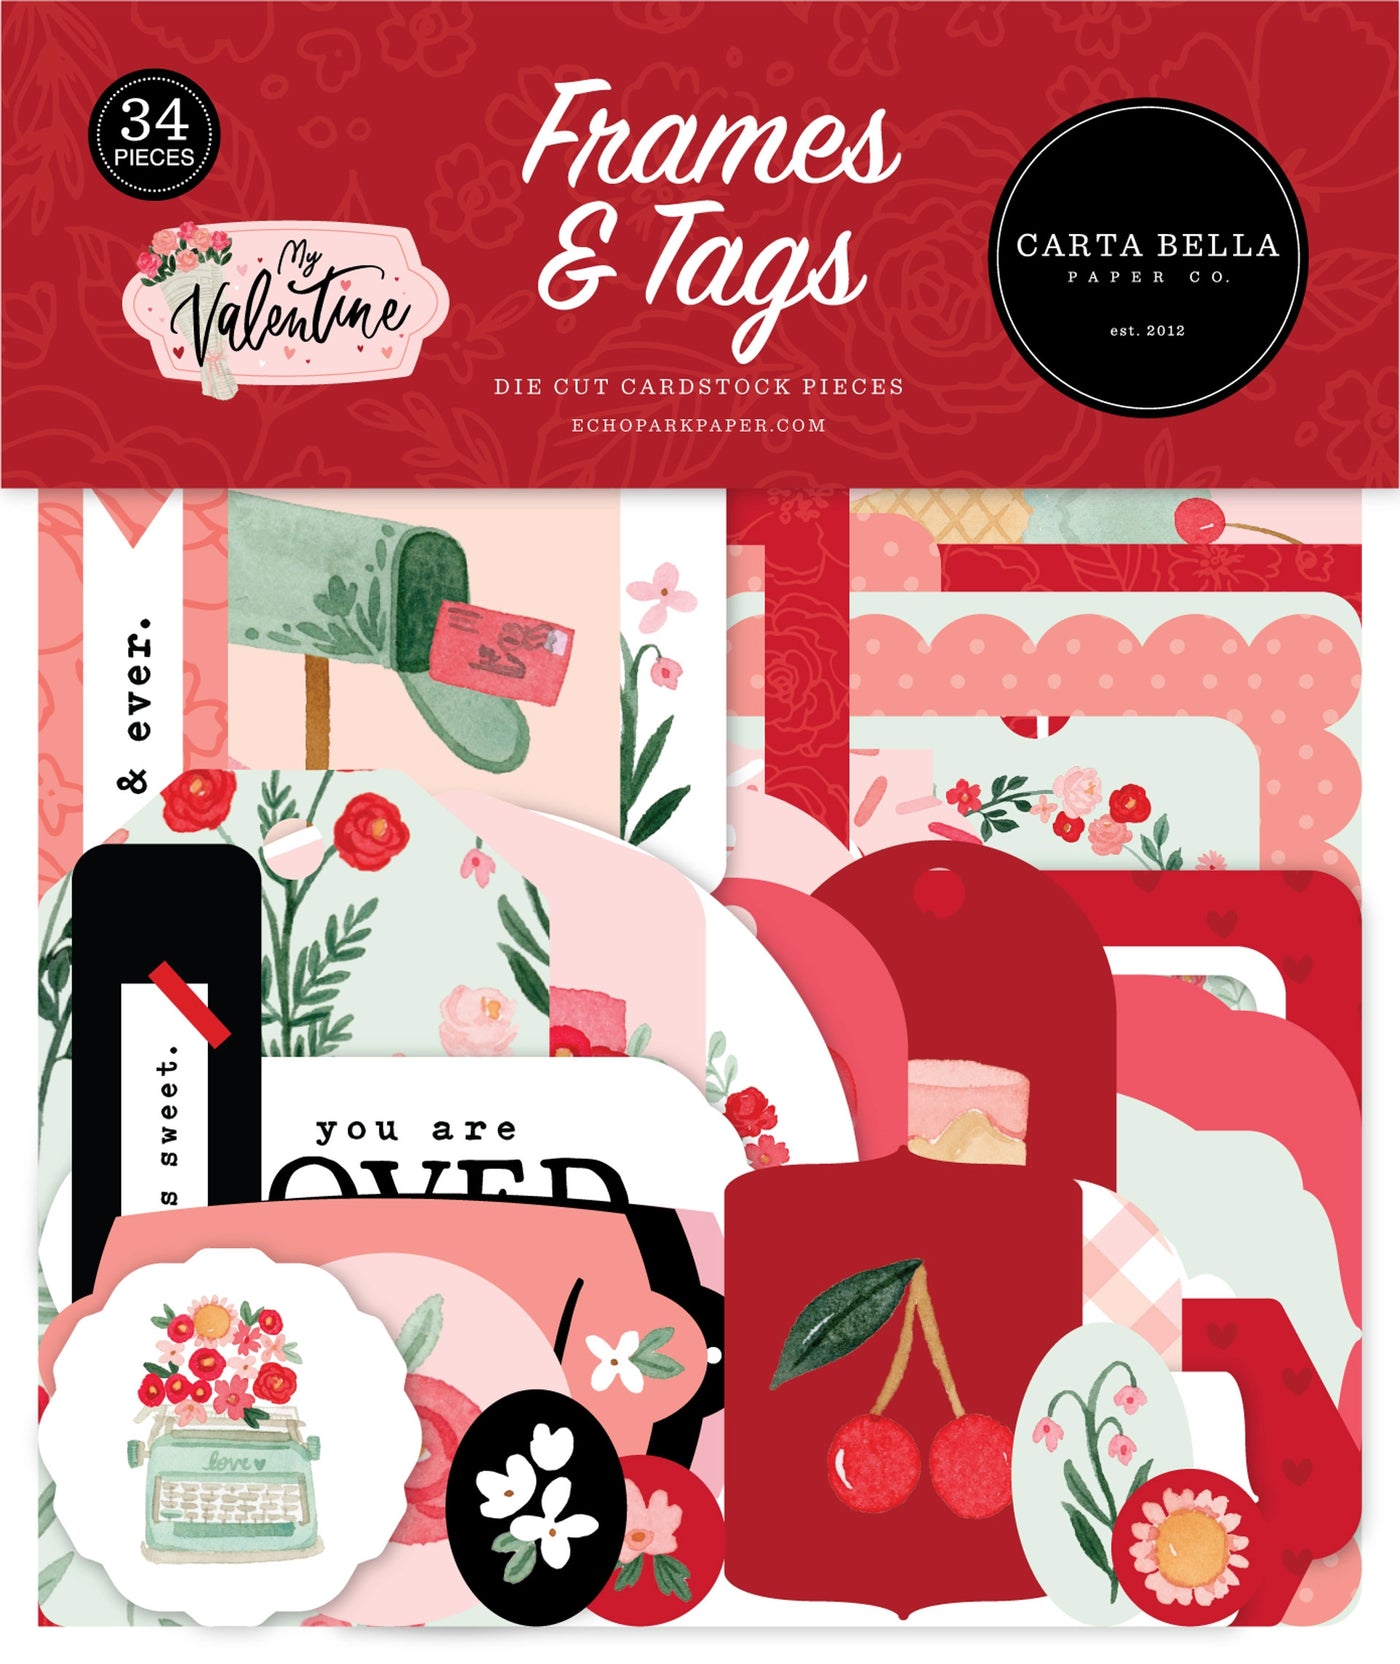 My Valentine Frames & Tags Die Cut Cardstock Pack. Pack includes 34 different die-cut shapes ready to embellish any project. Package size is 4.5" x 5.25"